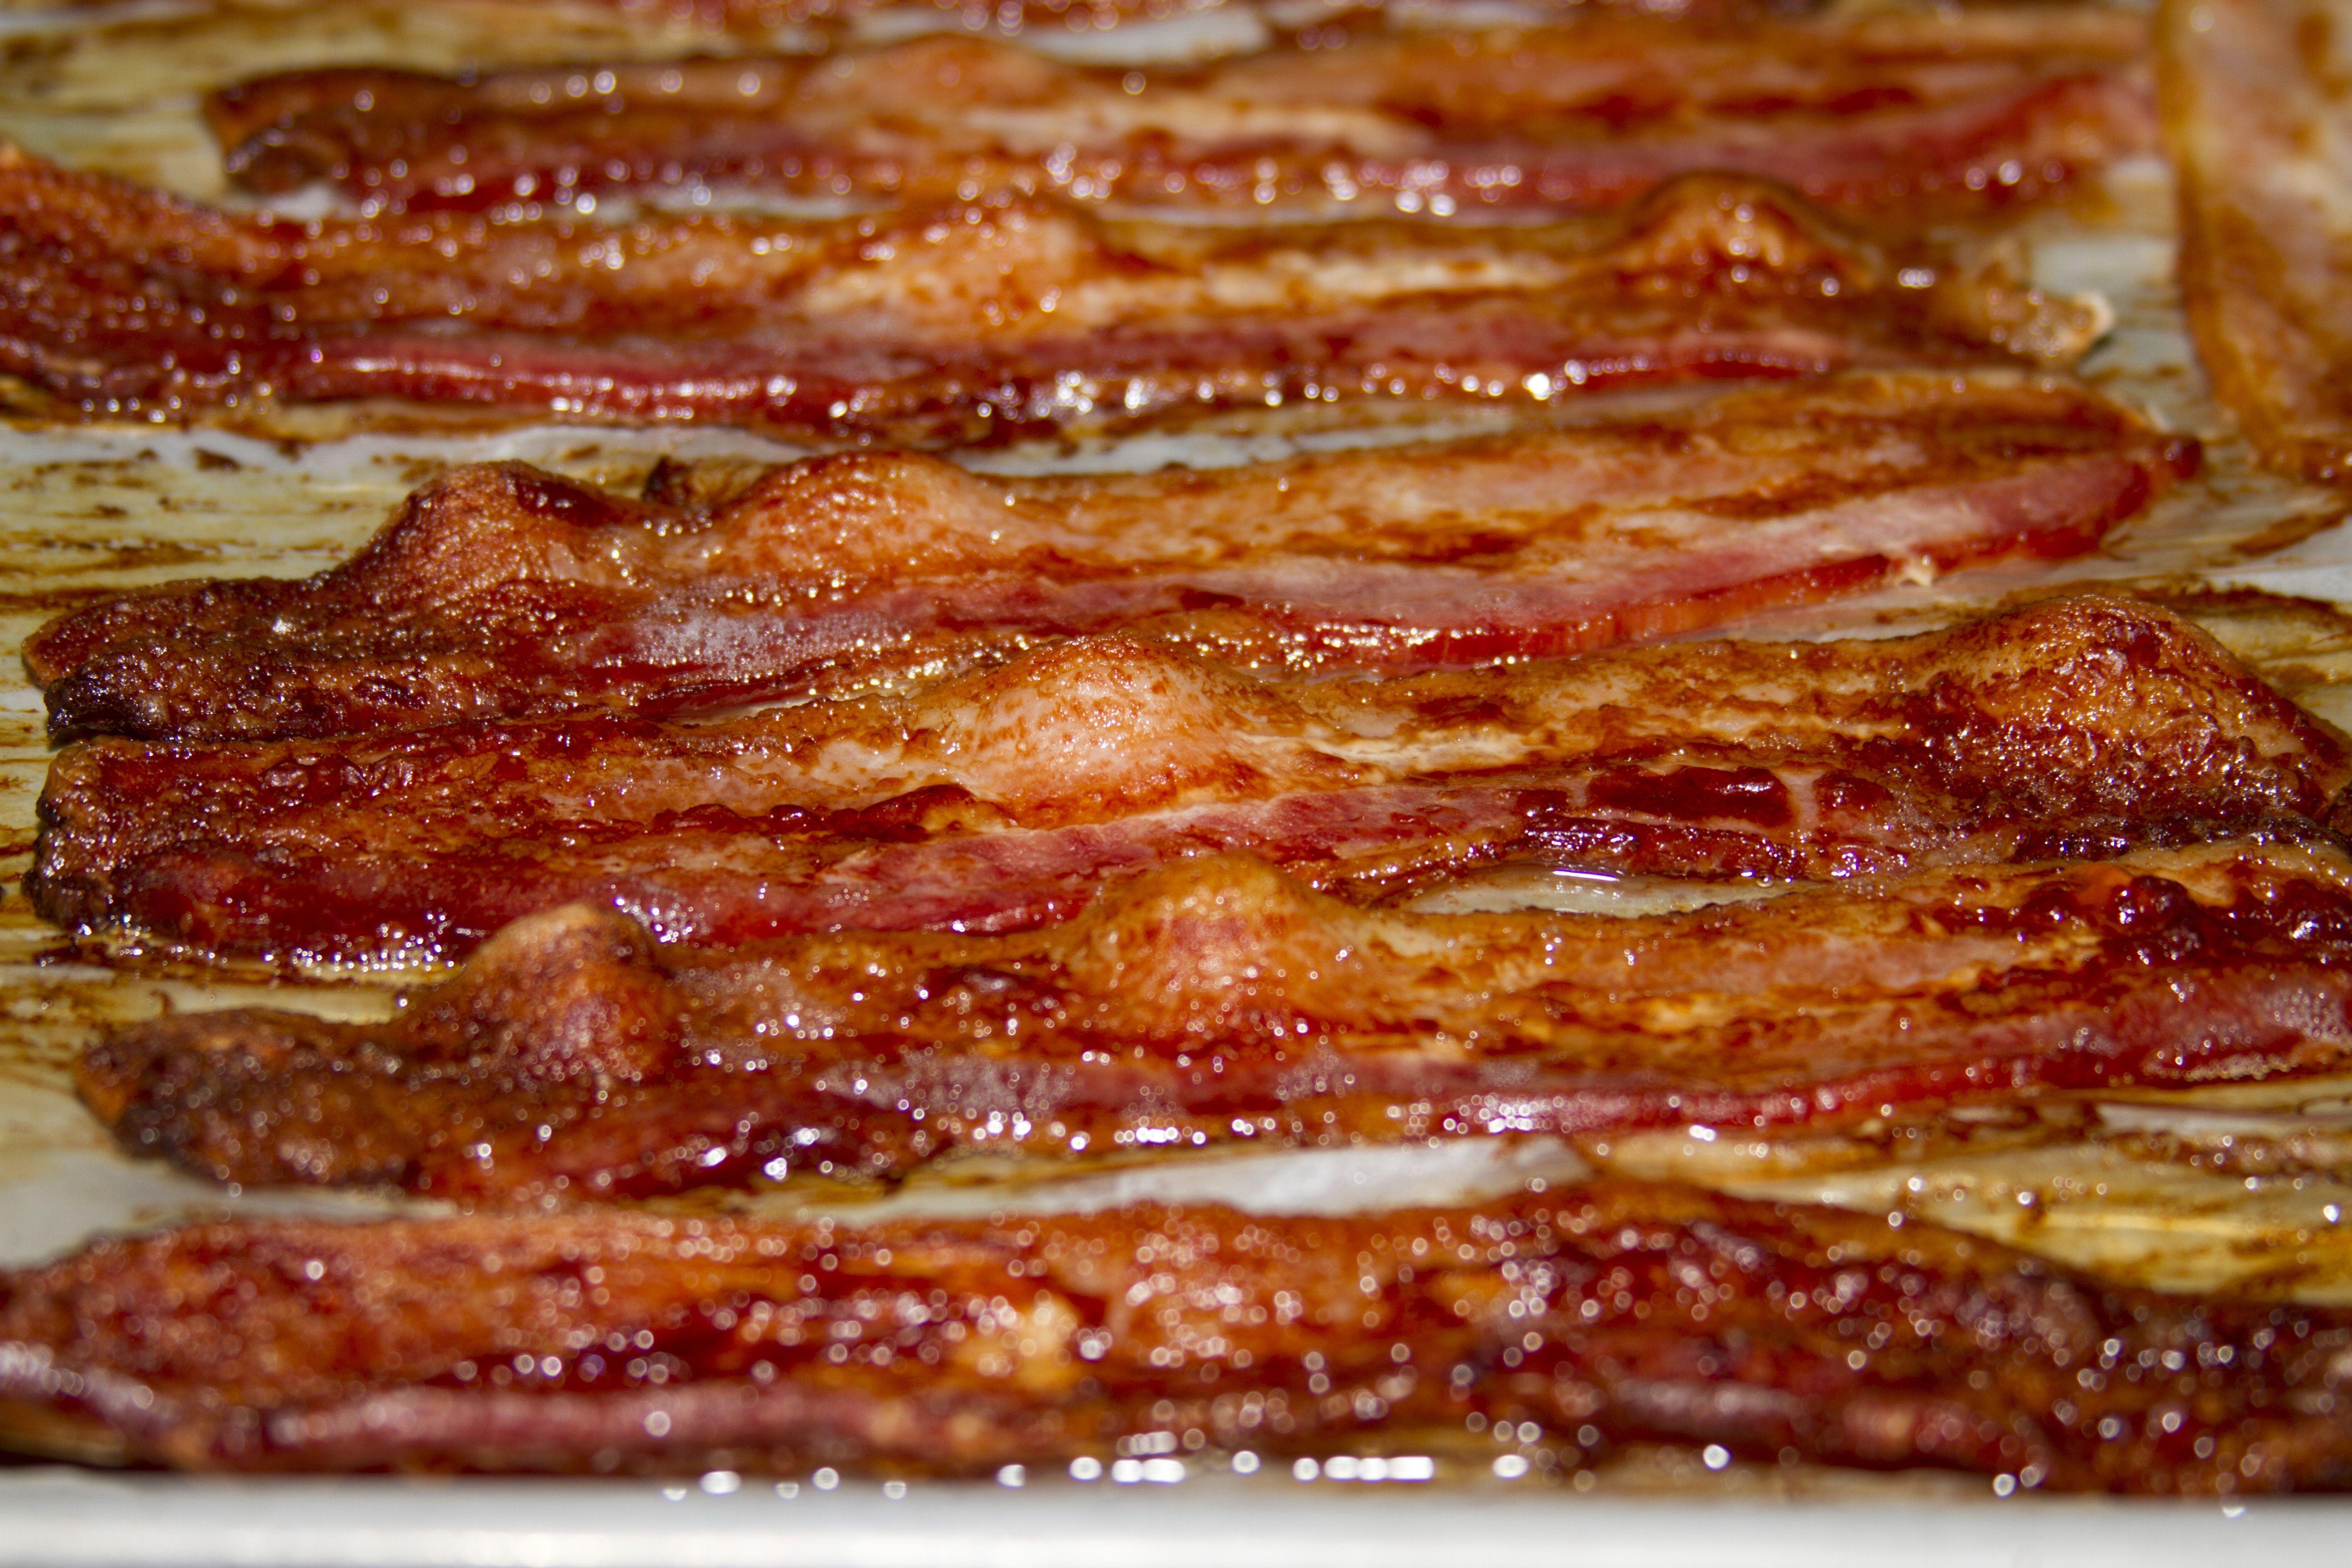 30 Bacon HD Wallpapers and Backgrounds